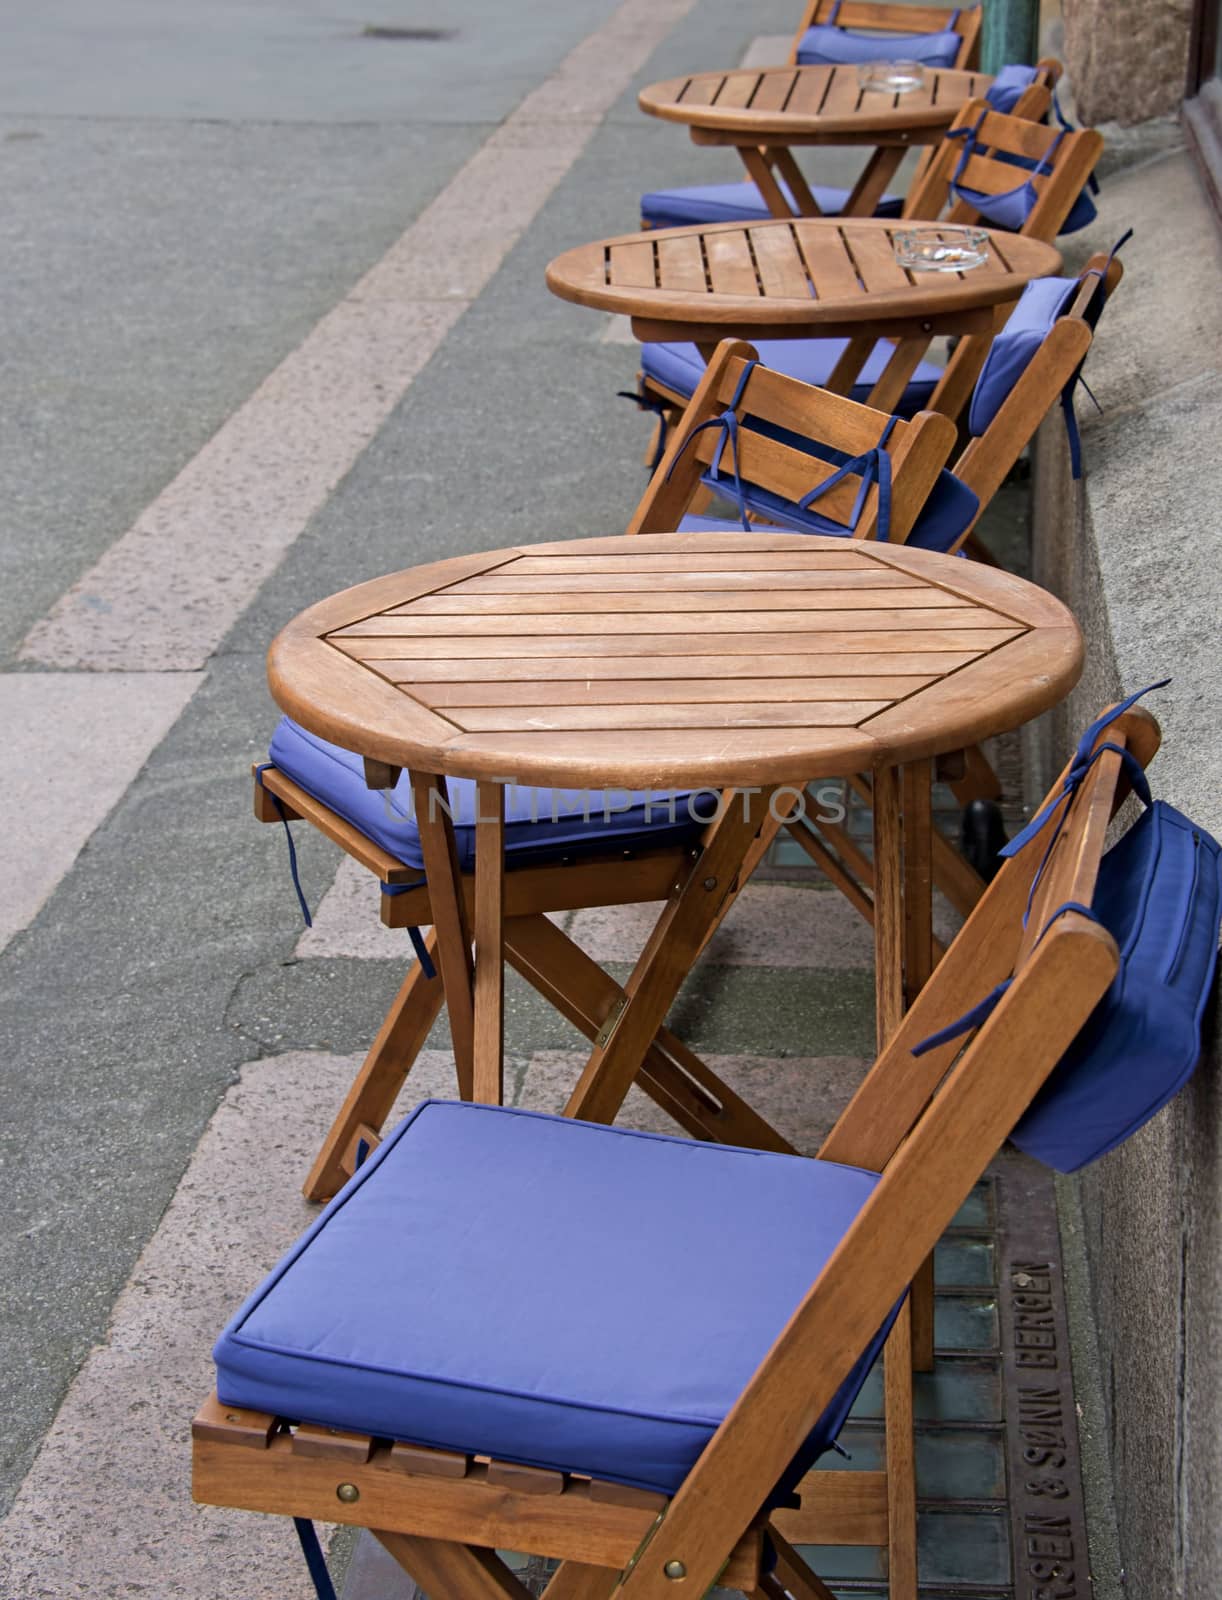 Street cafe tables by GryT